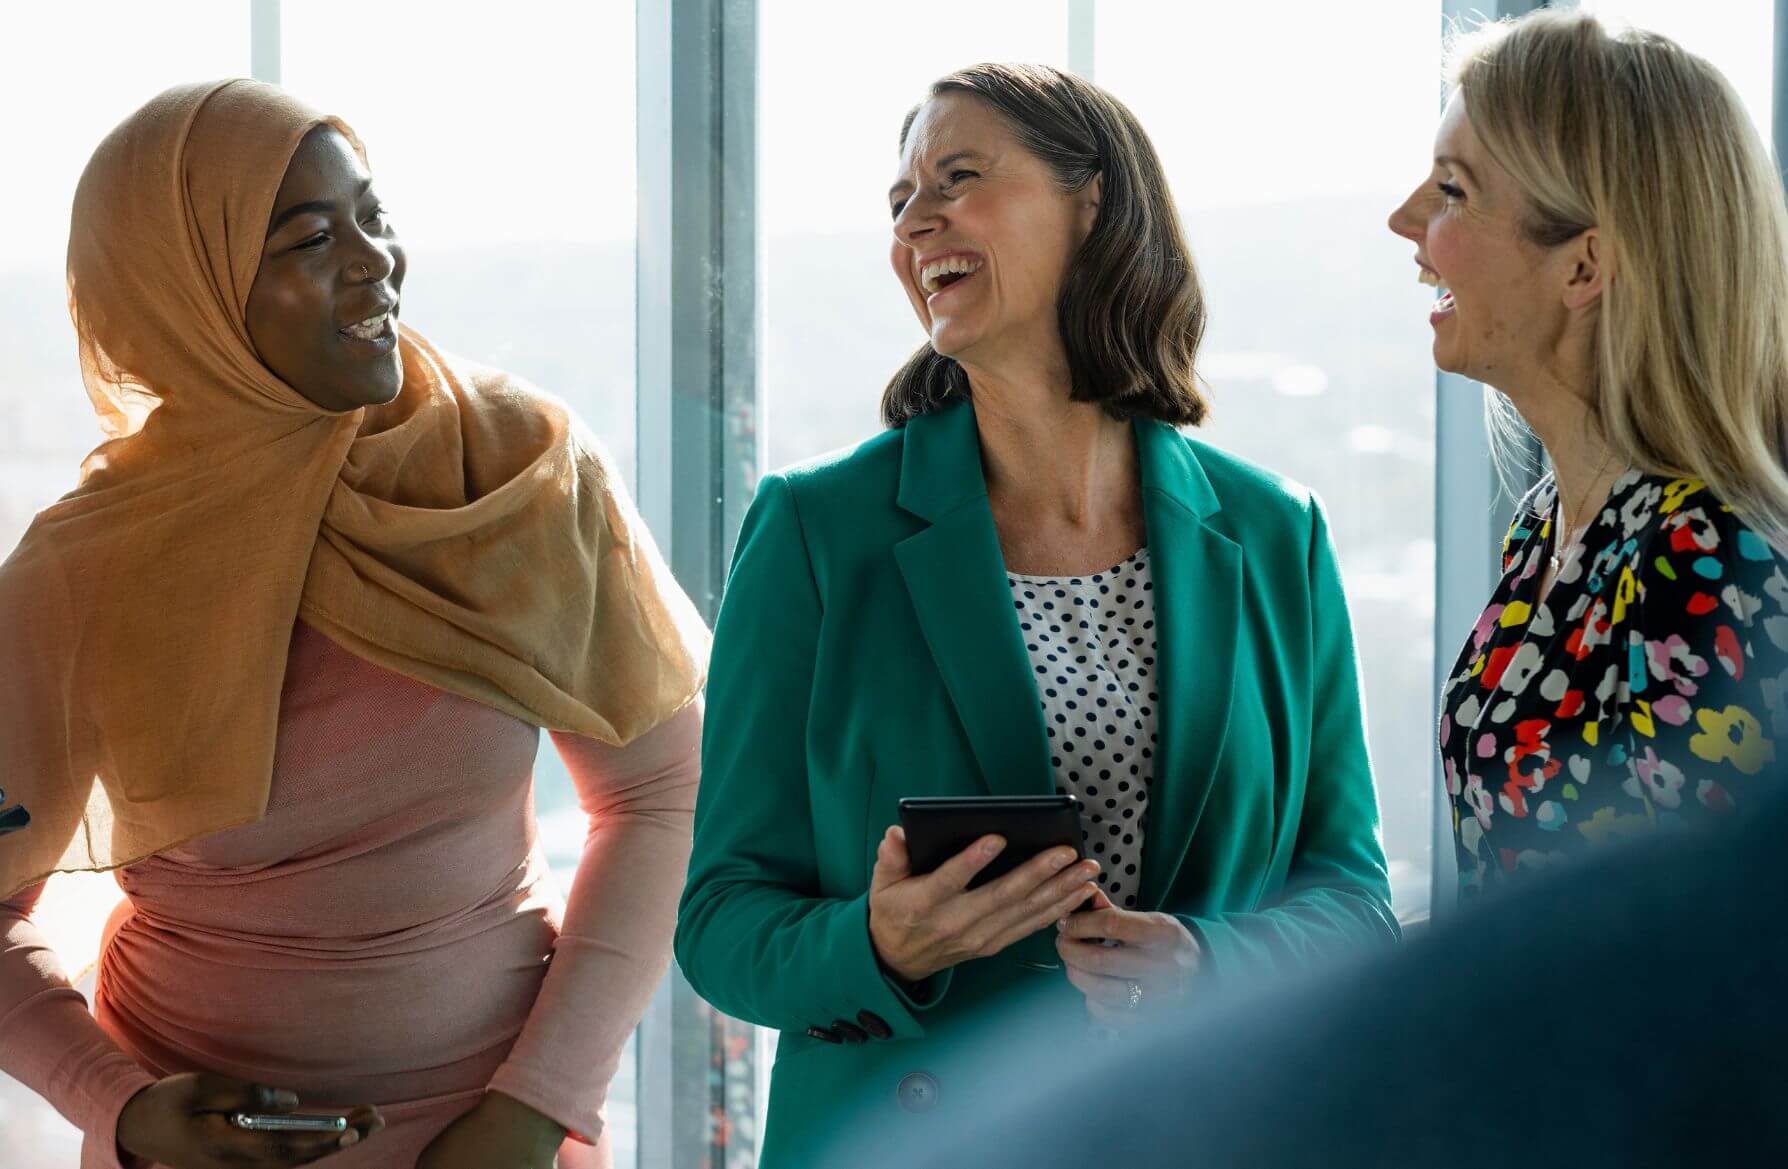 Business Women Laughing Together in Office at Work - Jobs Women Earn Higher Than Men